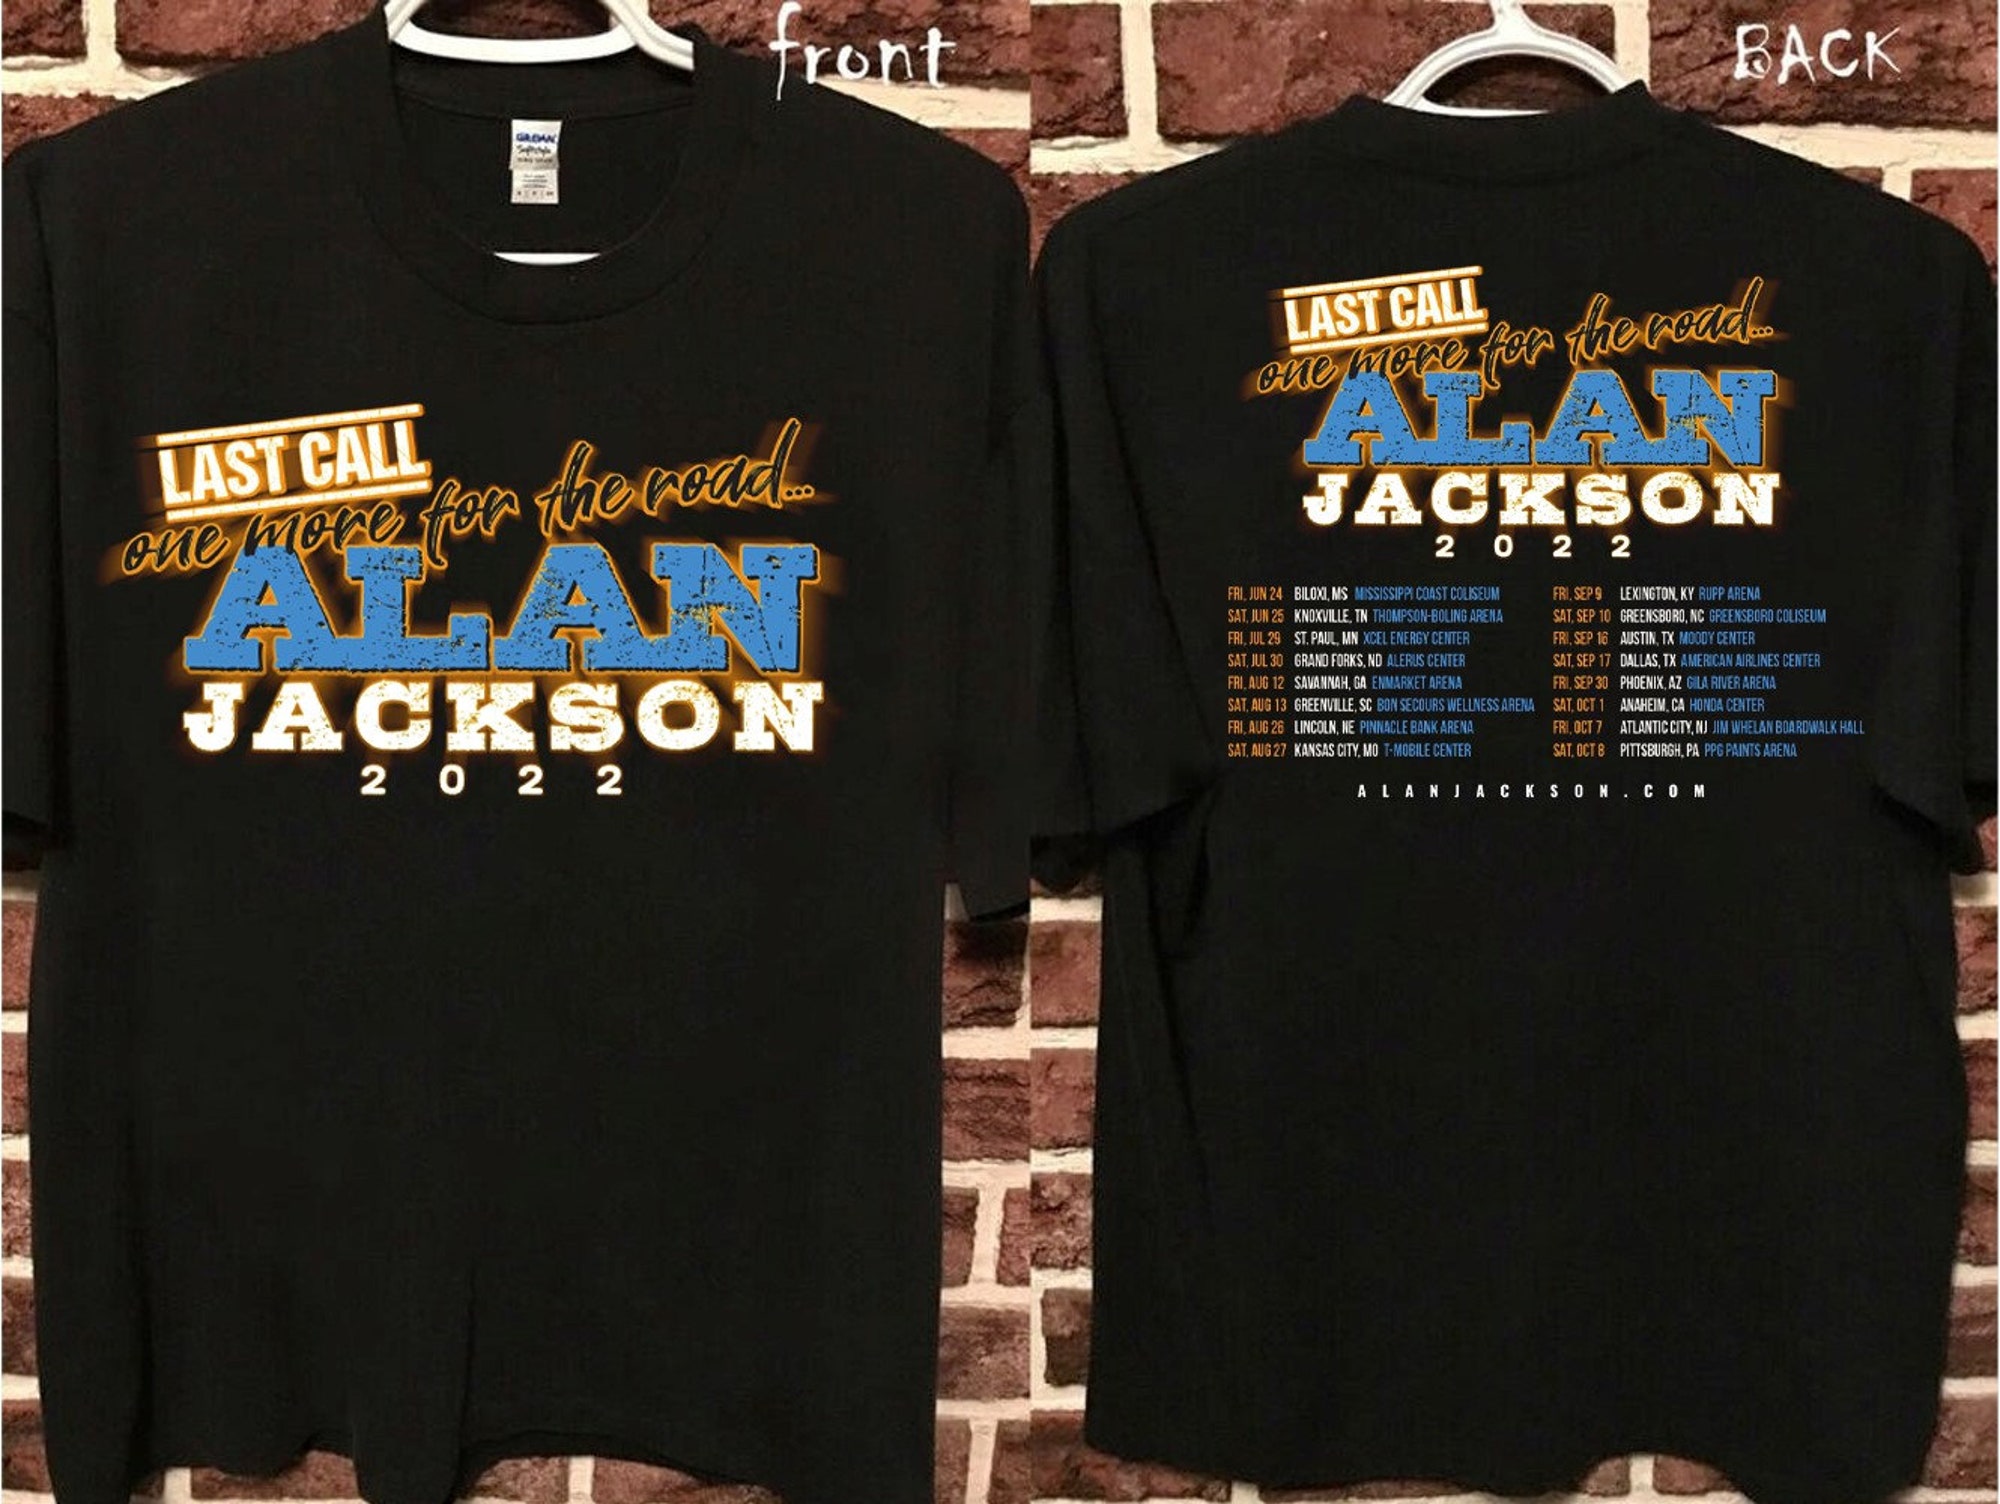 2022 Allan Jackson Last Call One More For The Road 2022 Tour T-Shirt